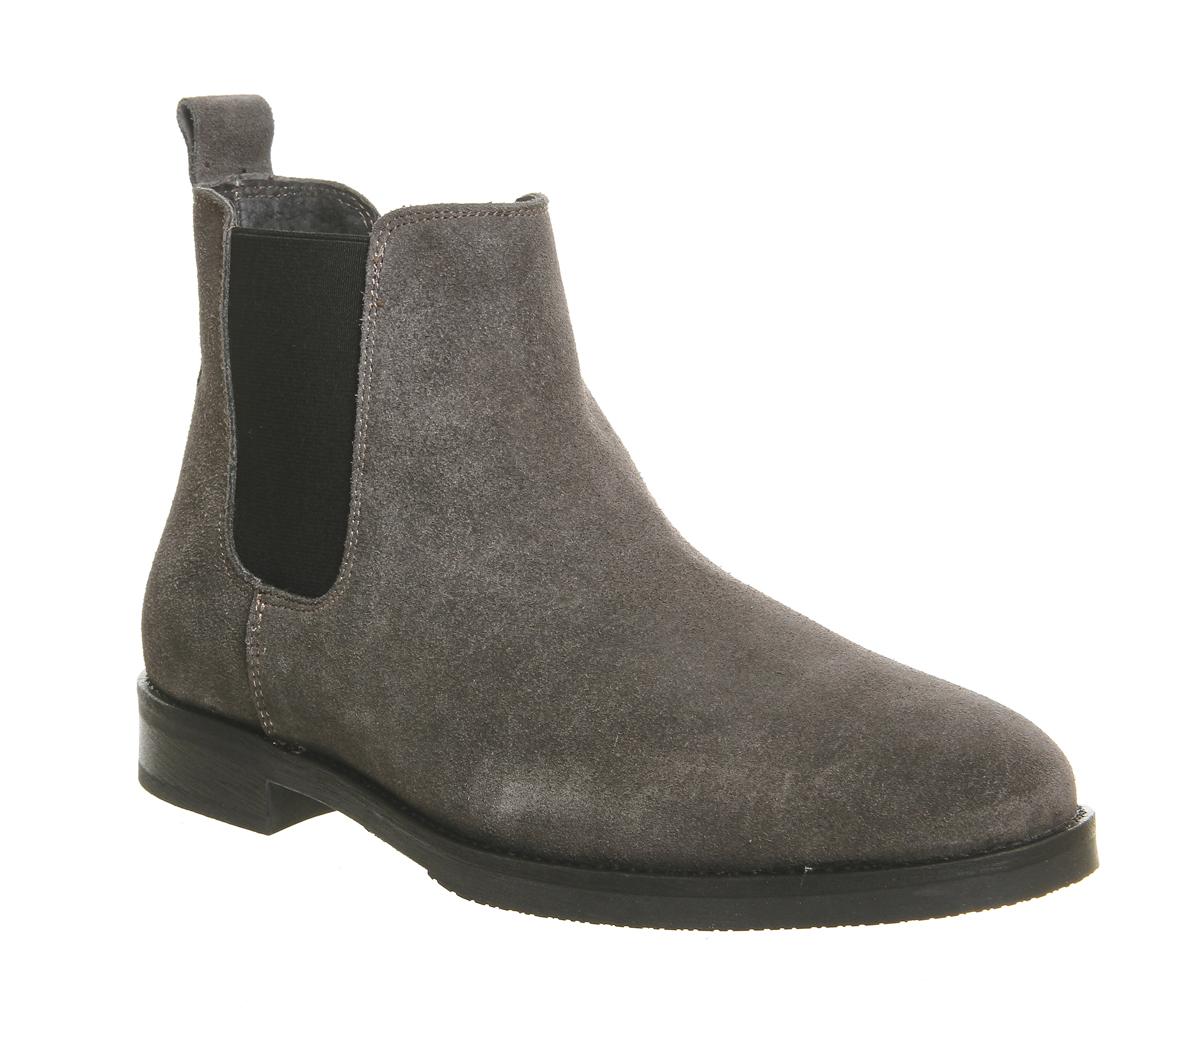 OFFICECage Chelsea BootsGrey Suede